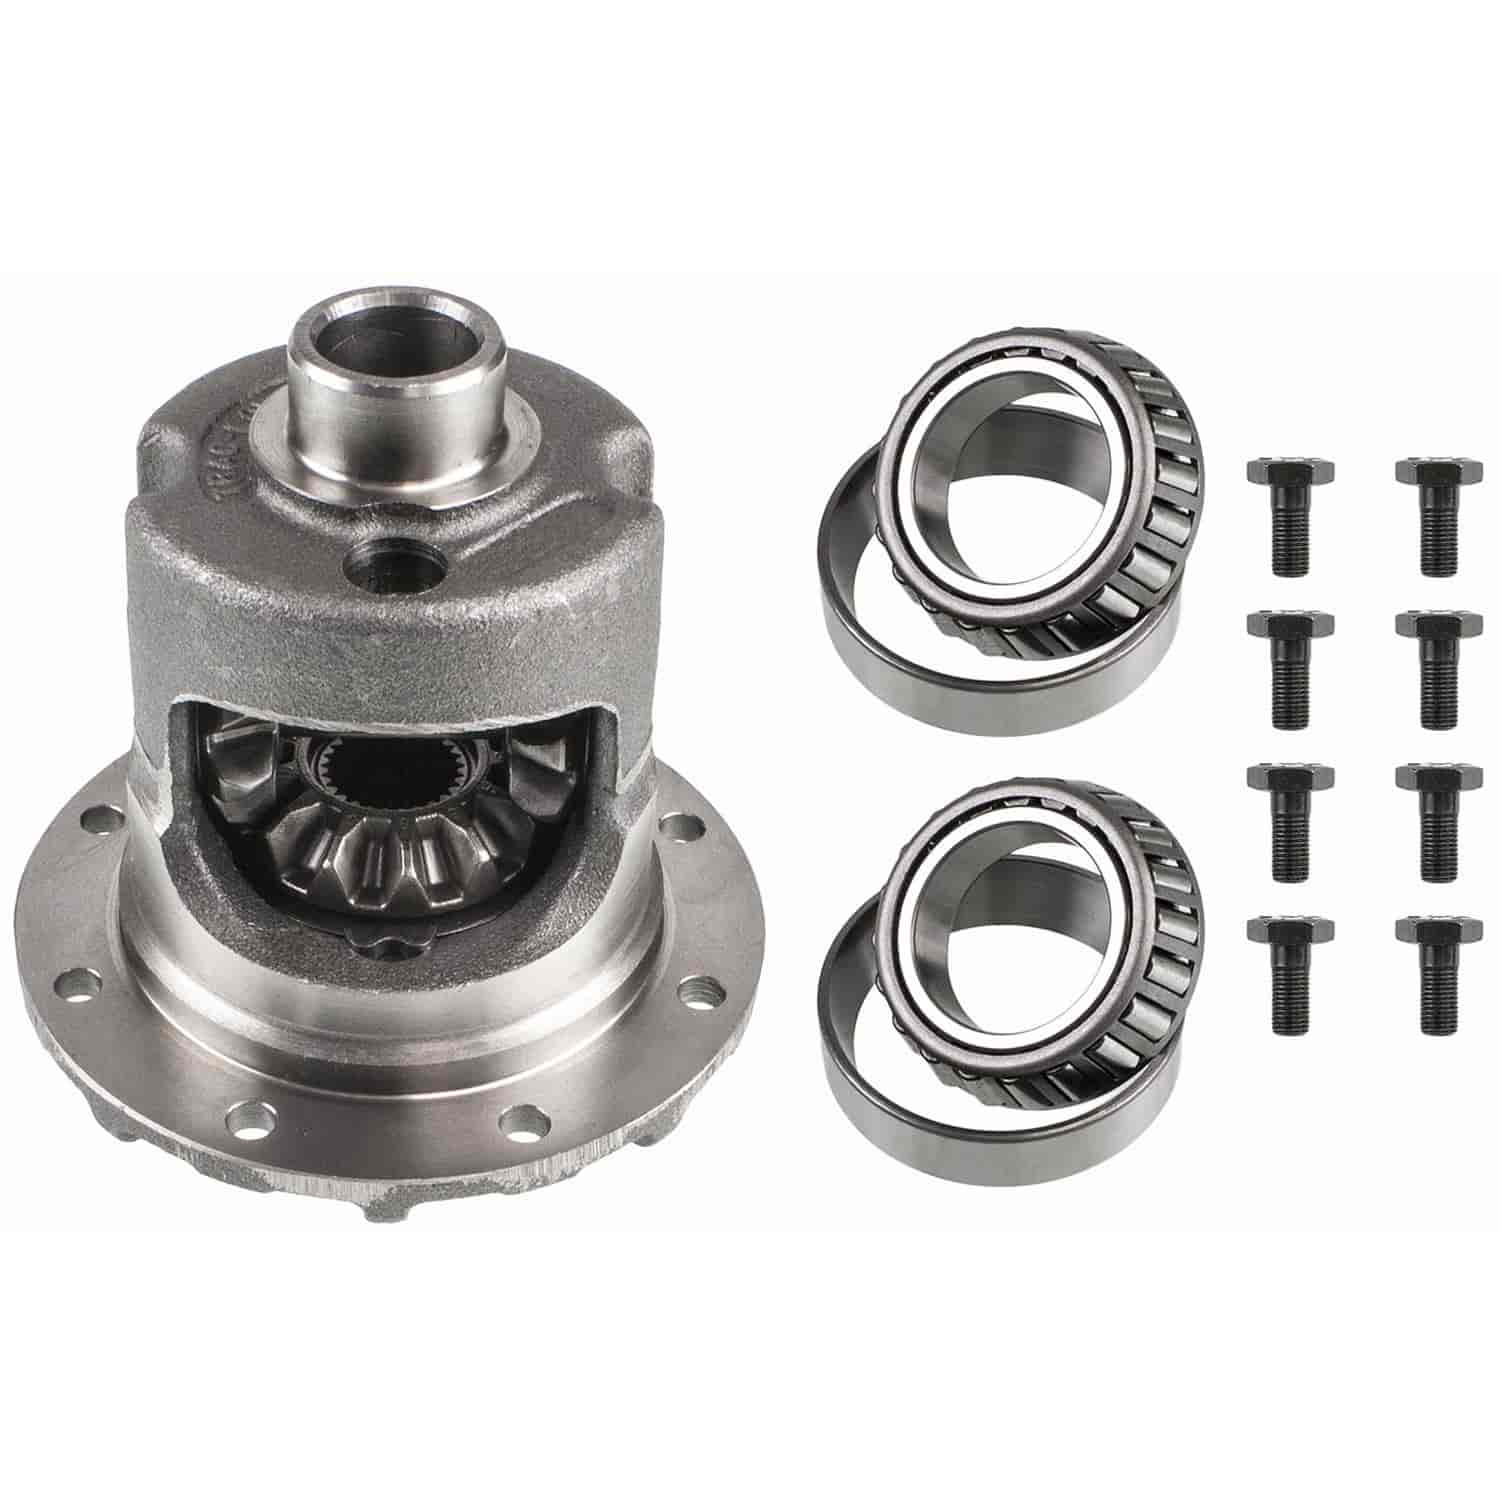 Differential Gear Case Kit 1.18 in. Dia. 27 Spline Incl. Internal Kit 3.54 Ratio And Up Posi